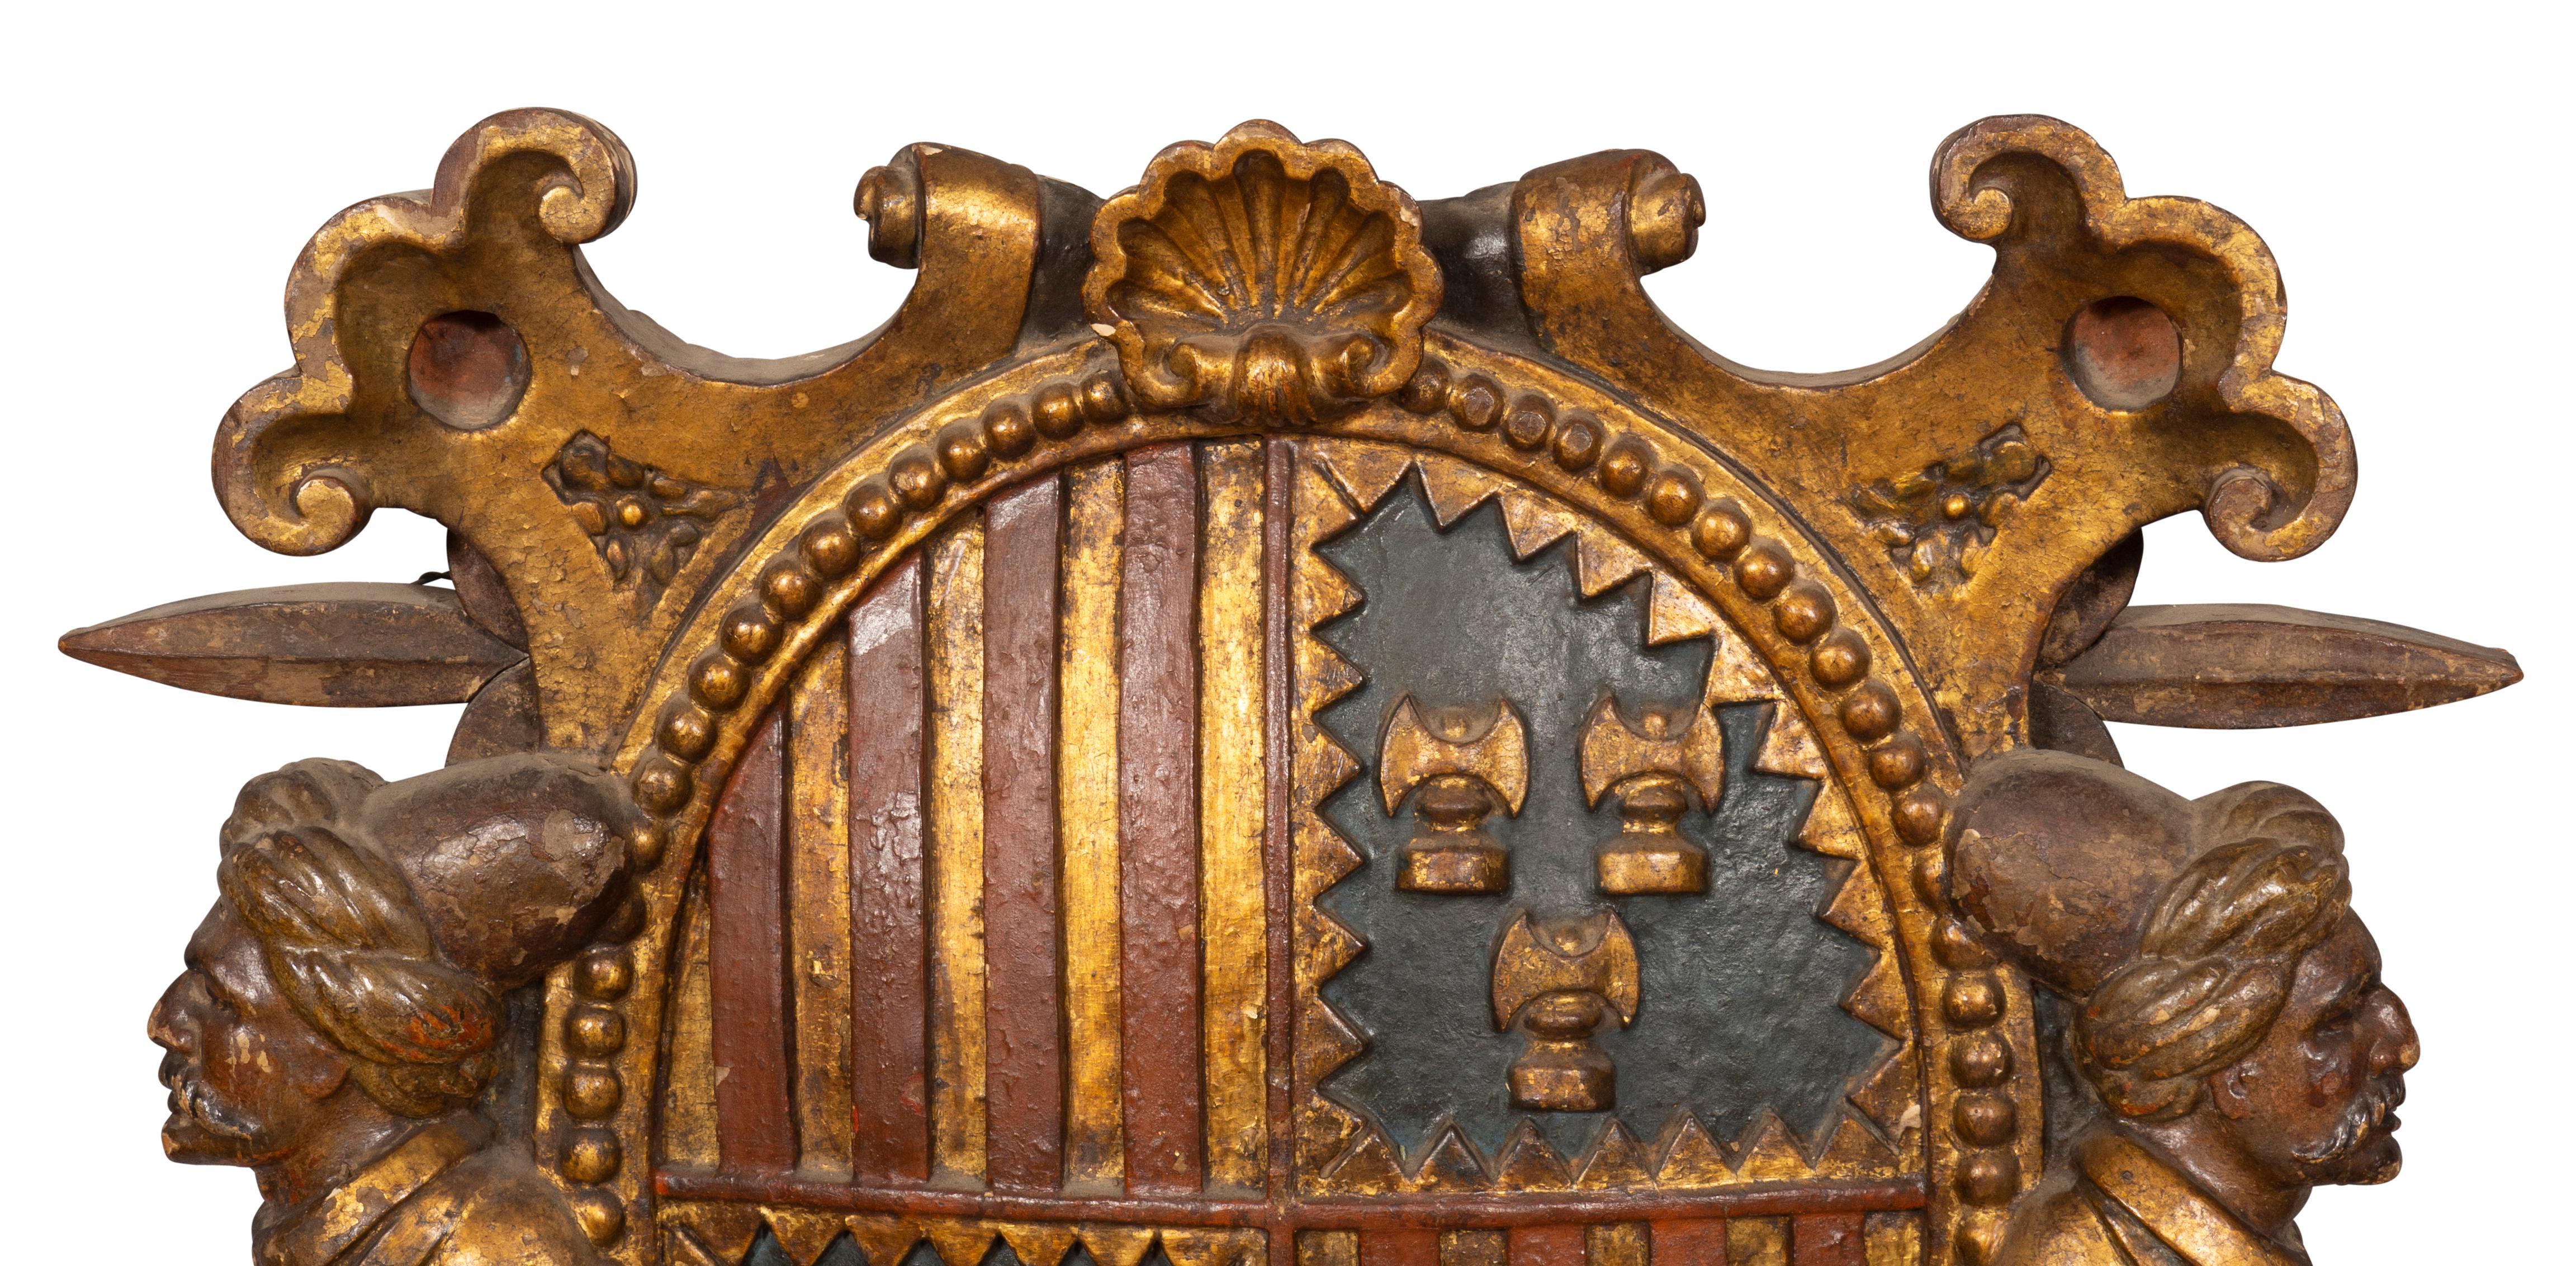 Oval shield with coat of arms and shell carving flanked by carved scrolls, the whole flanked by men with turbans , the base with the head of a soldier. This item is illustrated in 'Spanish Polychrome Sculpture in United States Collections